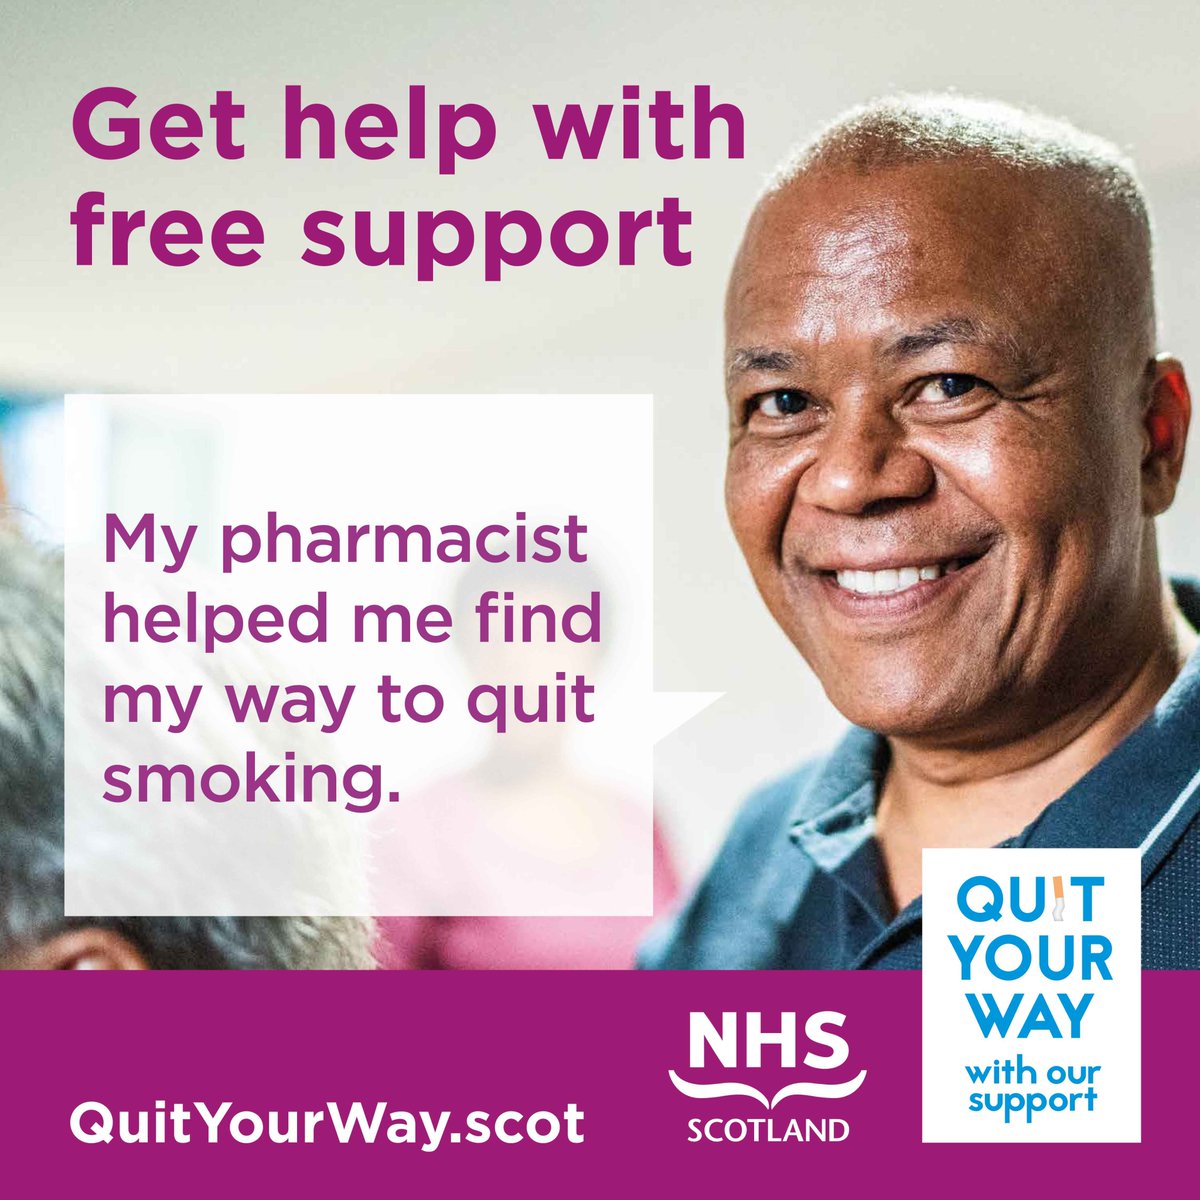 It’s important to find a way to stop smoking that works for you. Whether you want to quit on your own or need some help, your local pharmacy can support you to #QuitYourWay Get help with free support. Get started at QuitYourWay.scot